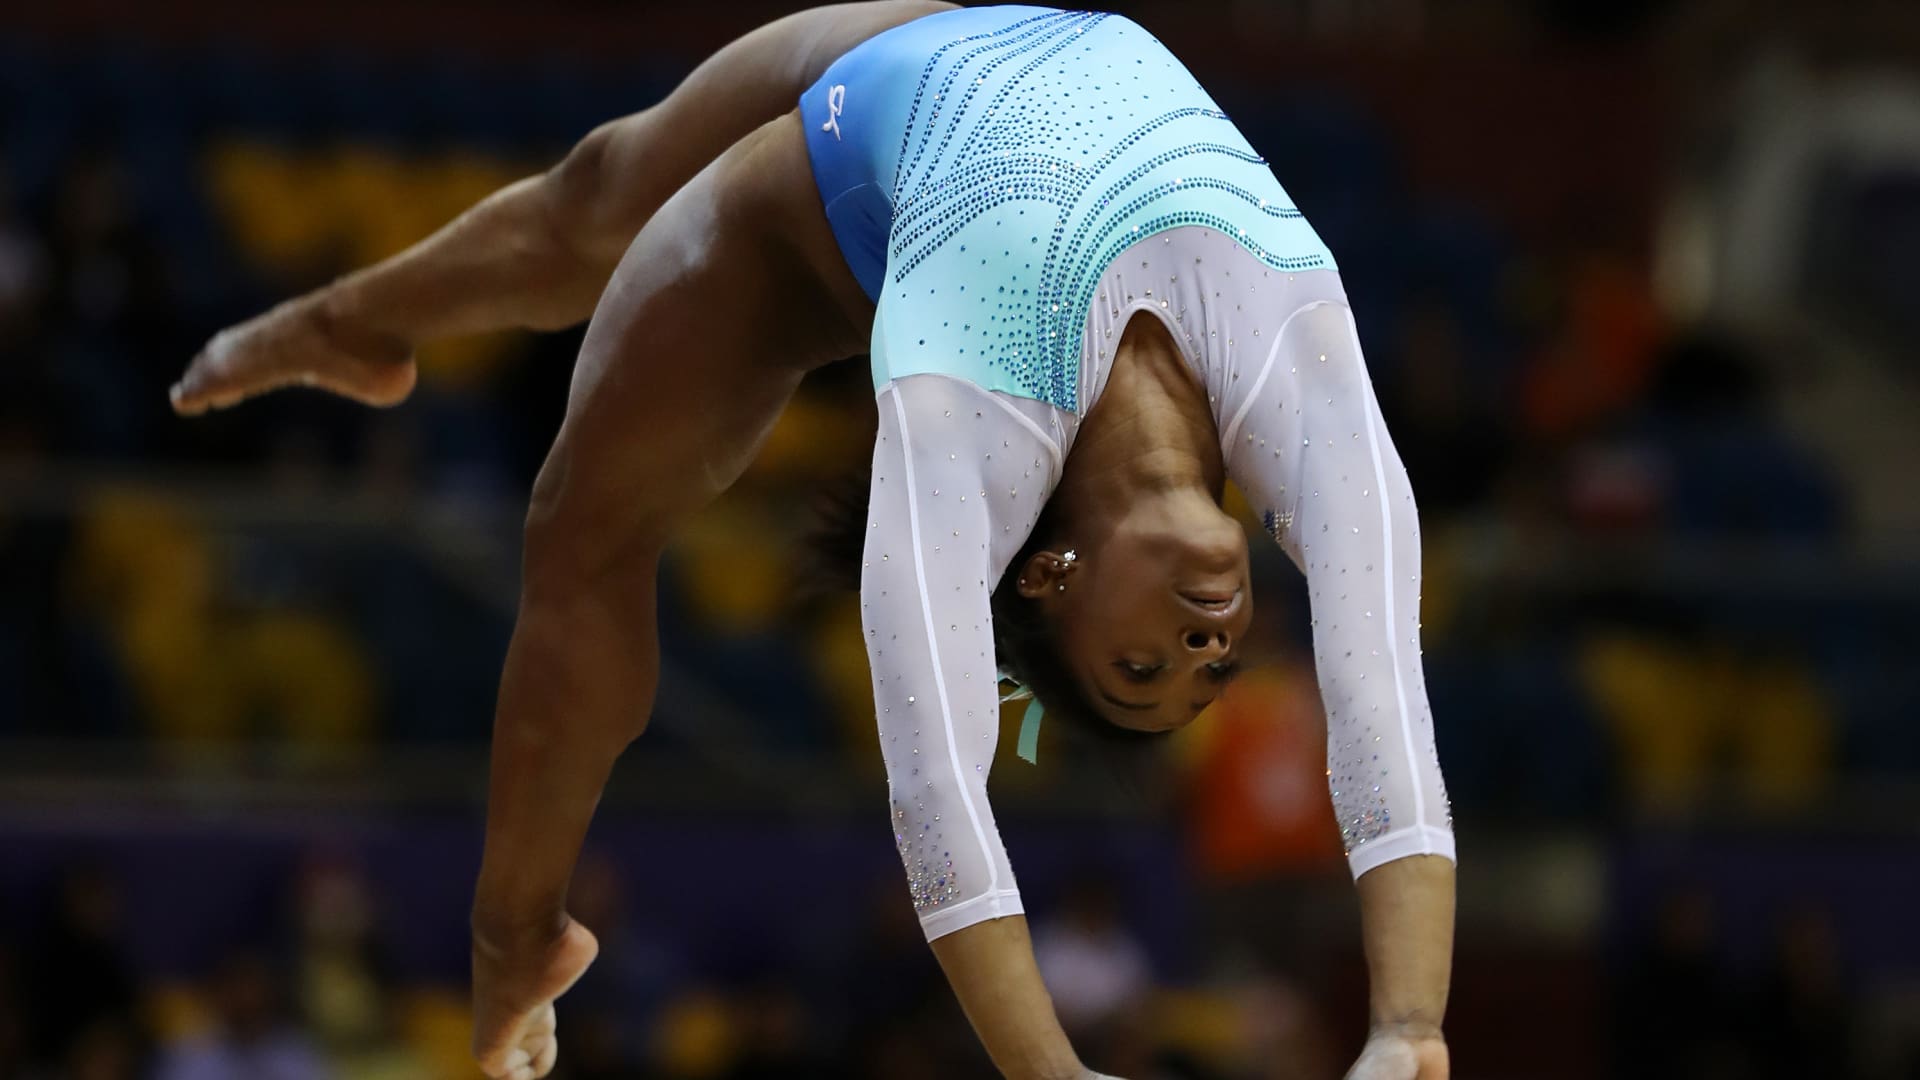 These five women forever changed the sport of artistic gymnastics